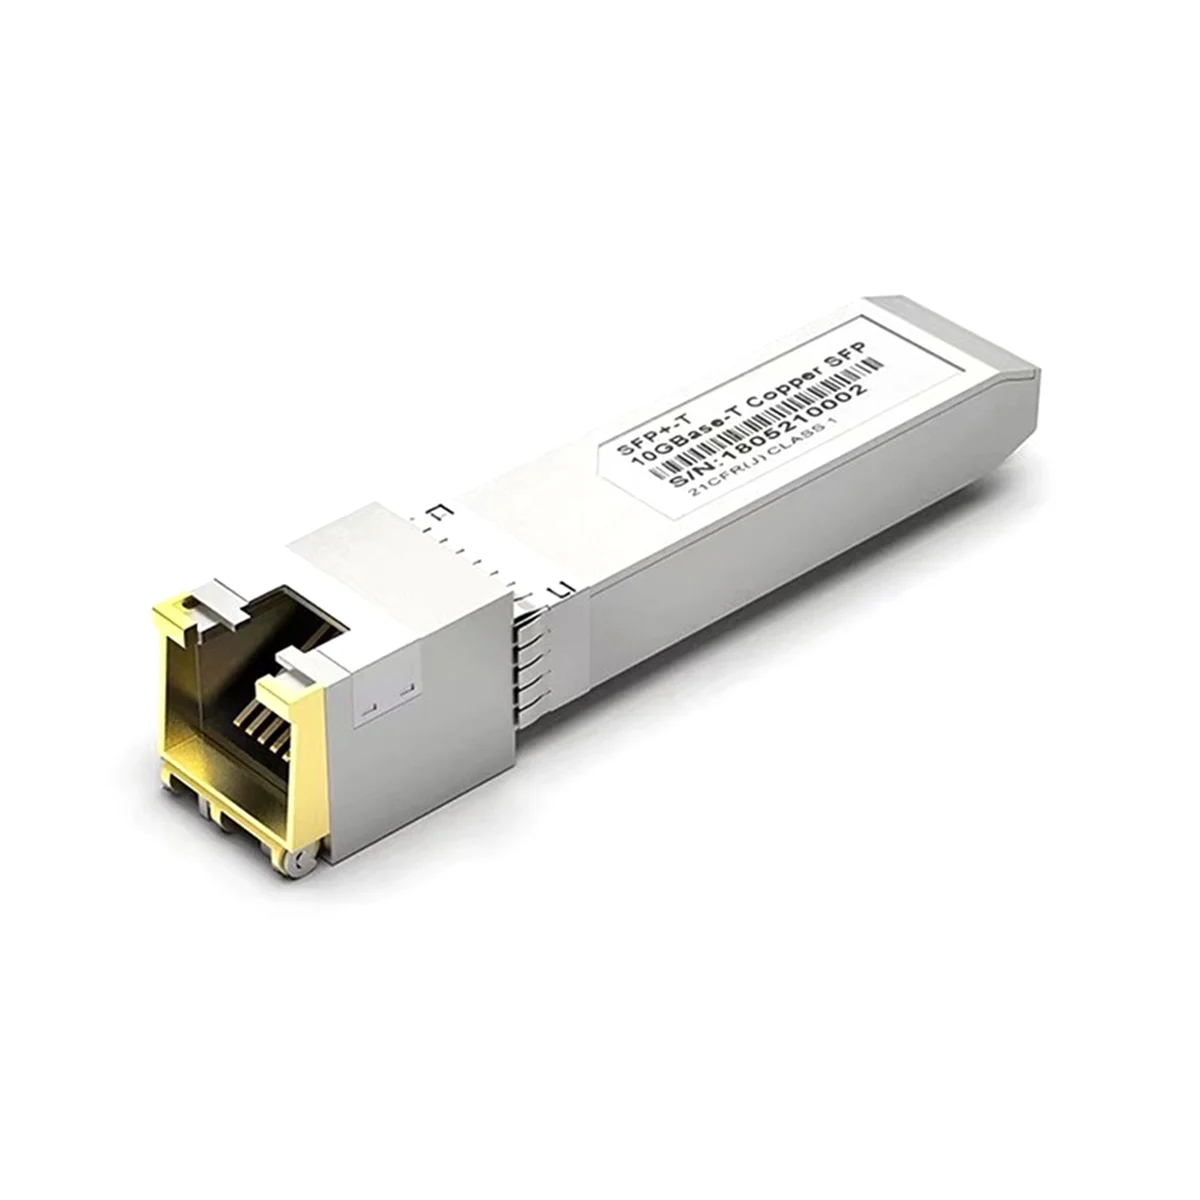 sfp-module-rj45-switch-gbic-10g-connector-sfp-copper-cable-sfp-10g-electrical-port-optical-module-ethernet-port